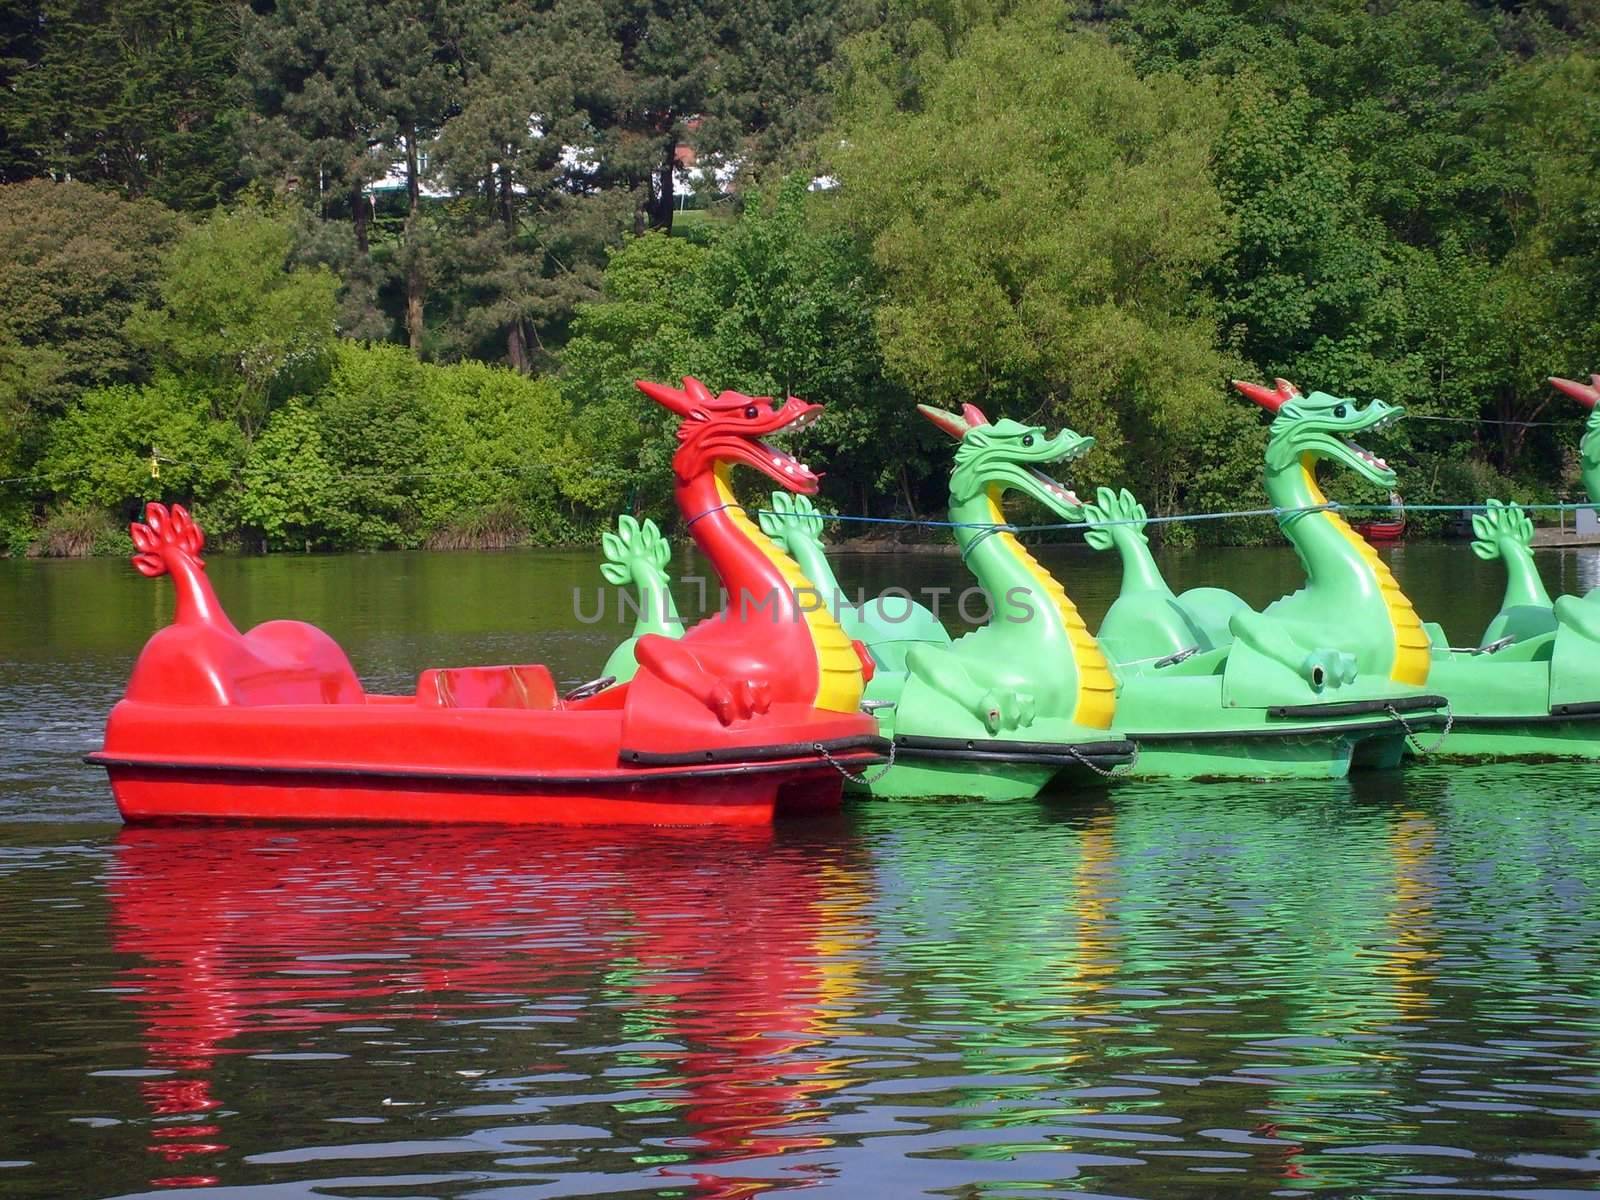 Dragon boats on boating lake in Peasholm Park, Scarborough, England.